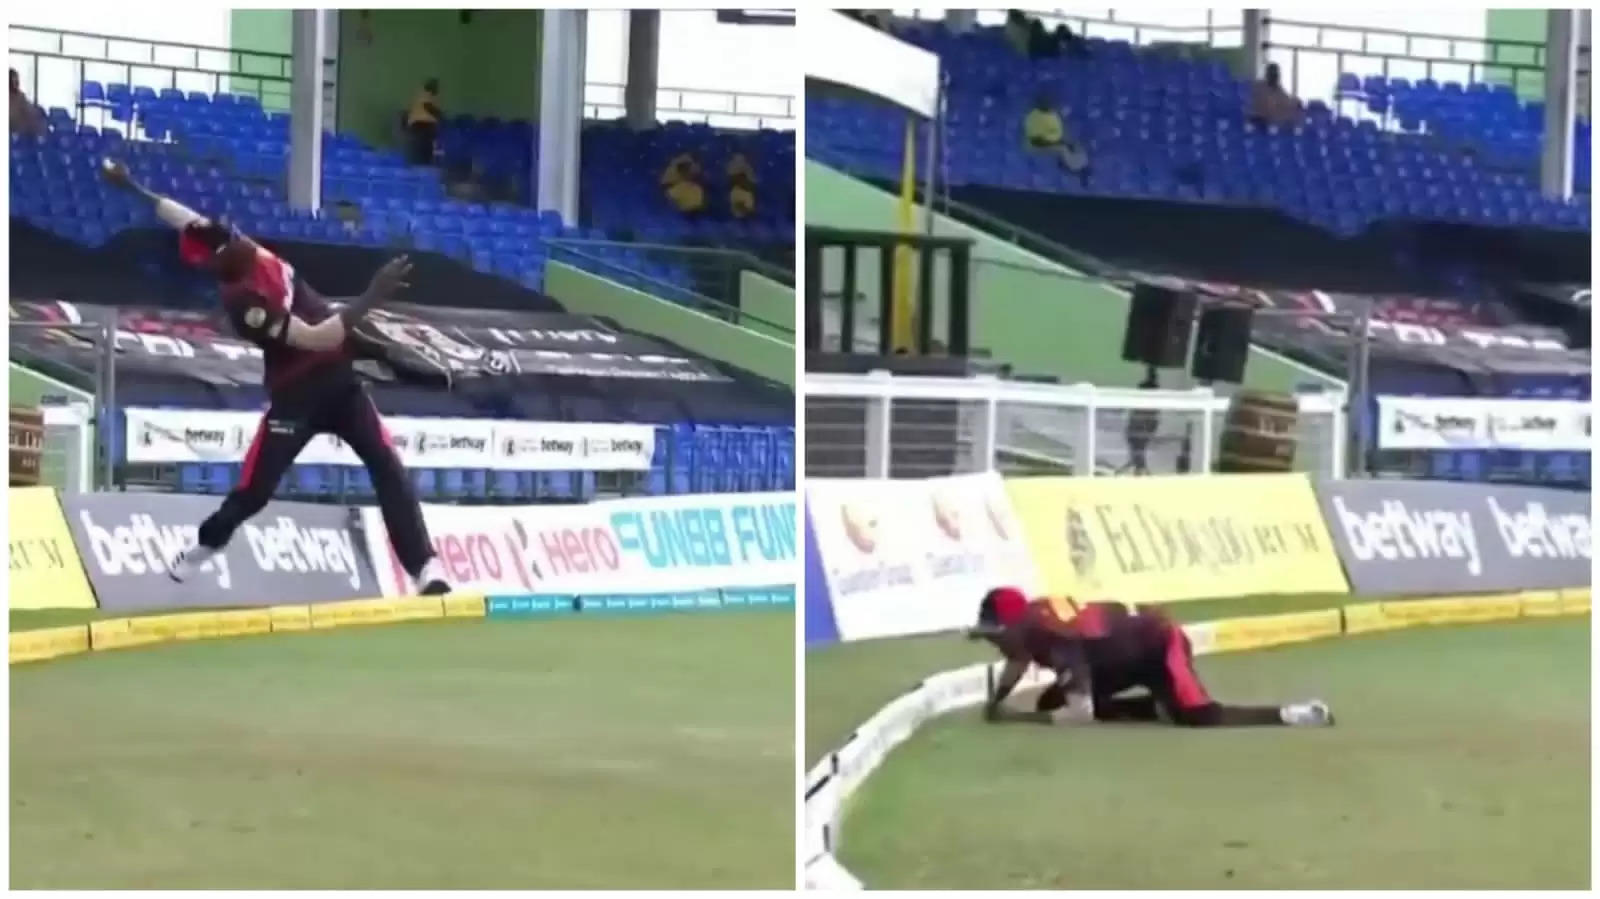 WATCH: Akeal Hosein’s jaw-dropping catch at the boundary to dismiss Nicholas Pooran